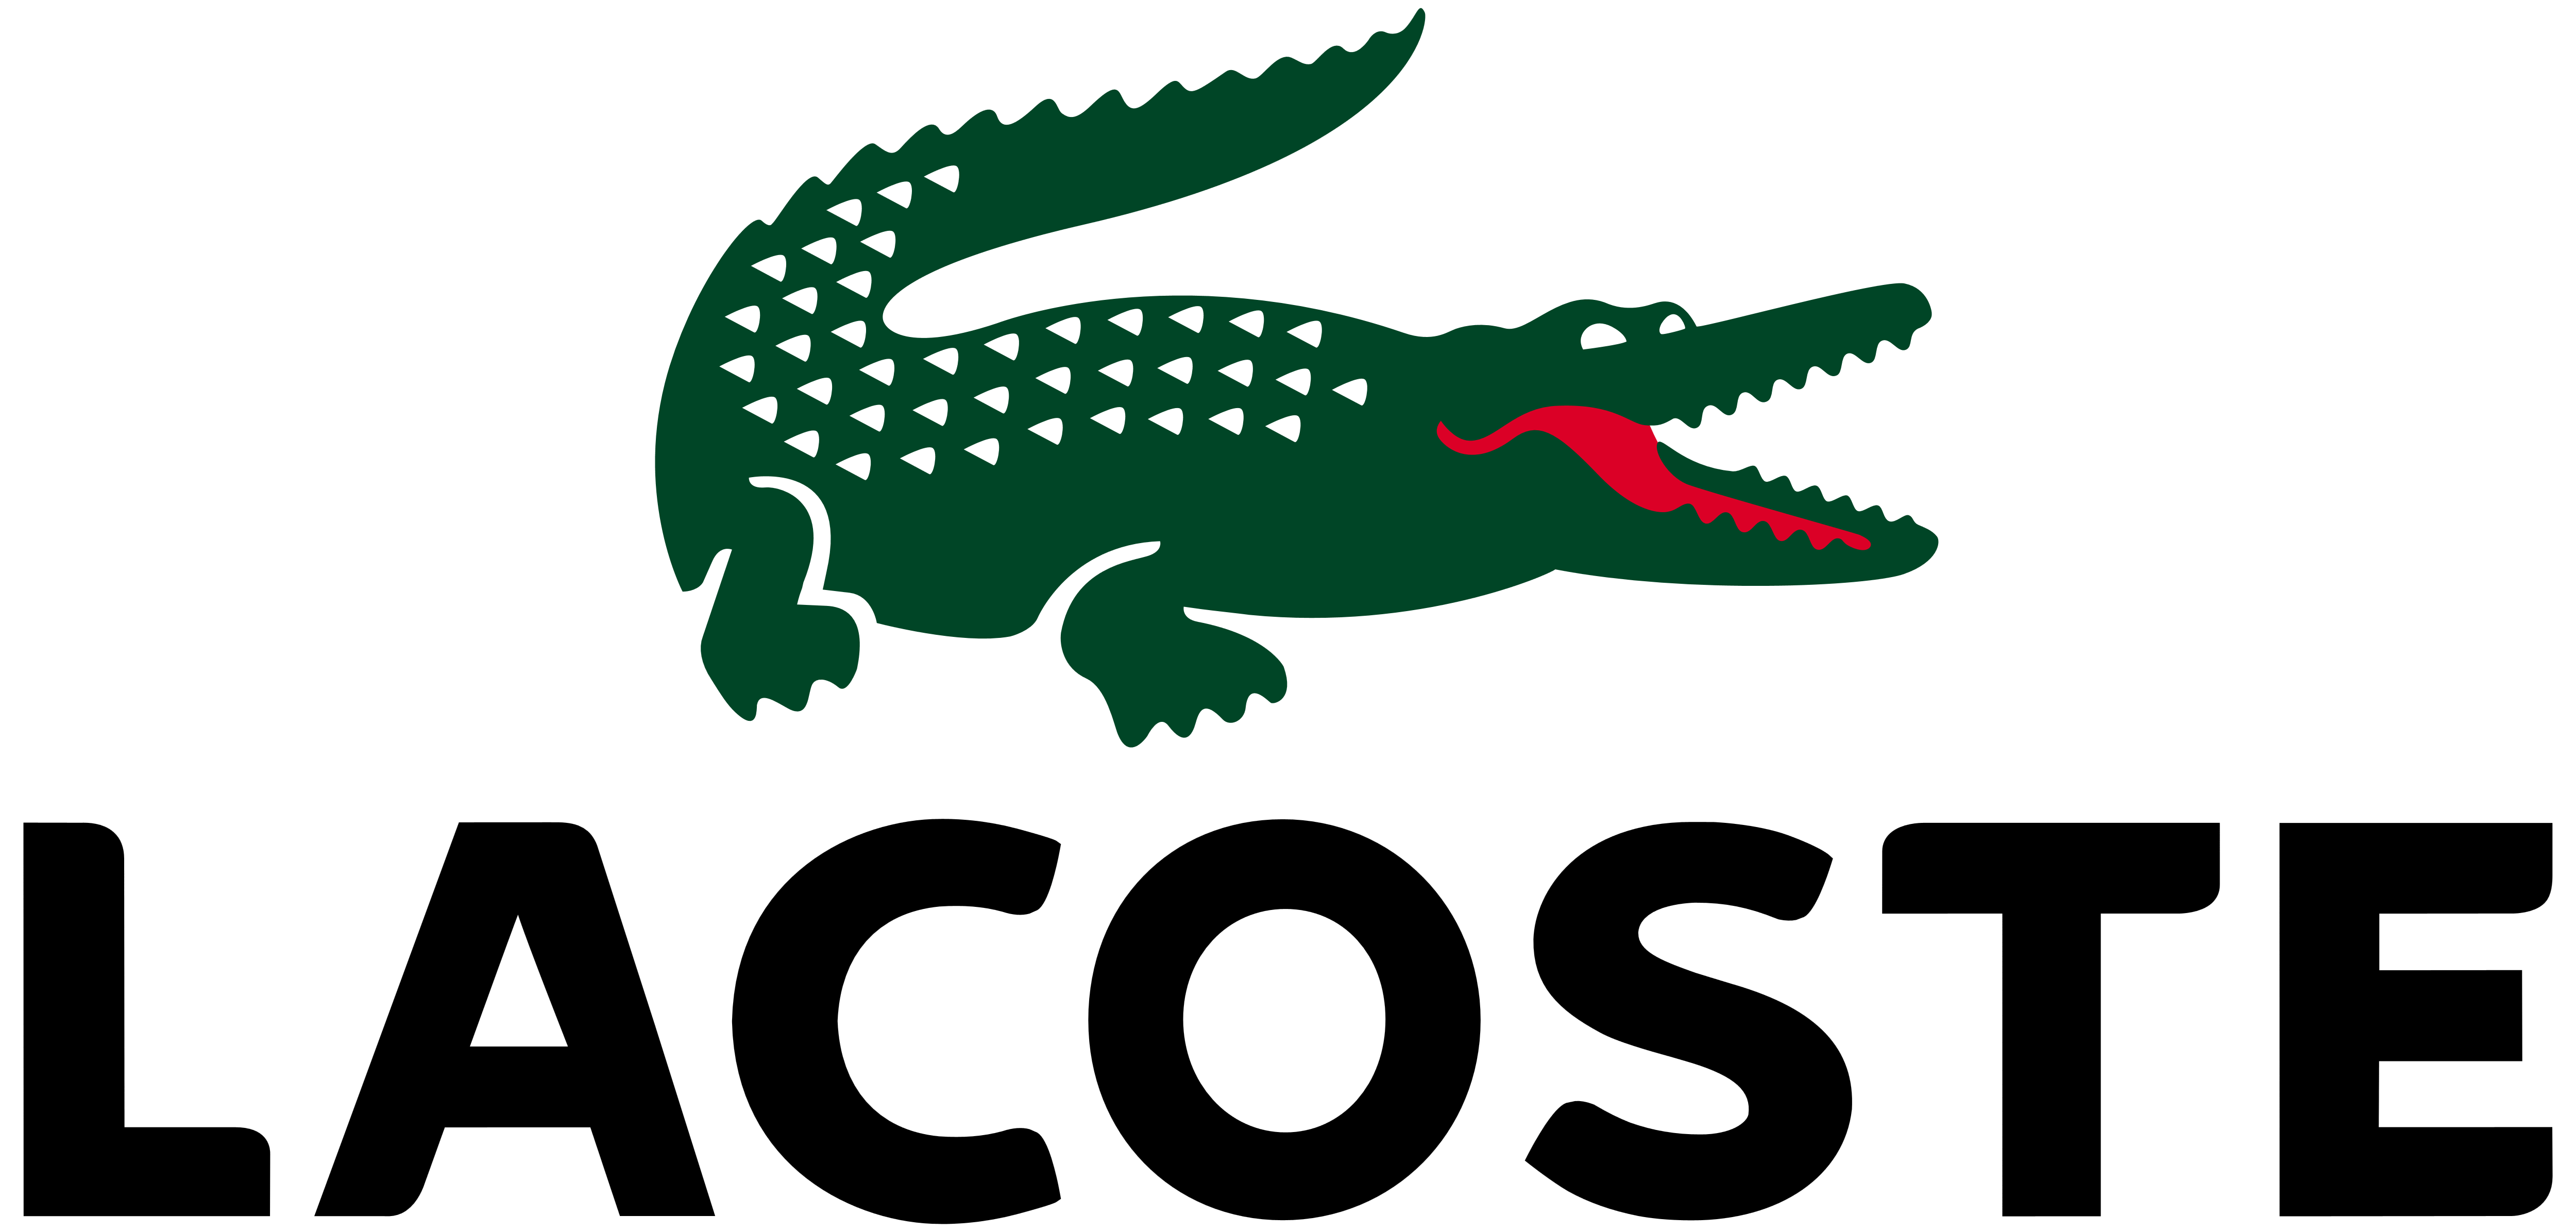 Lacoste Free PNG Image